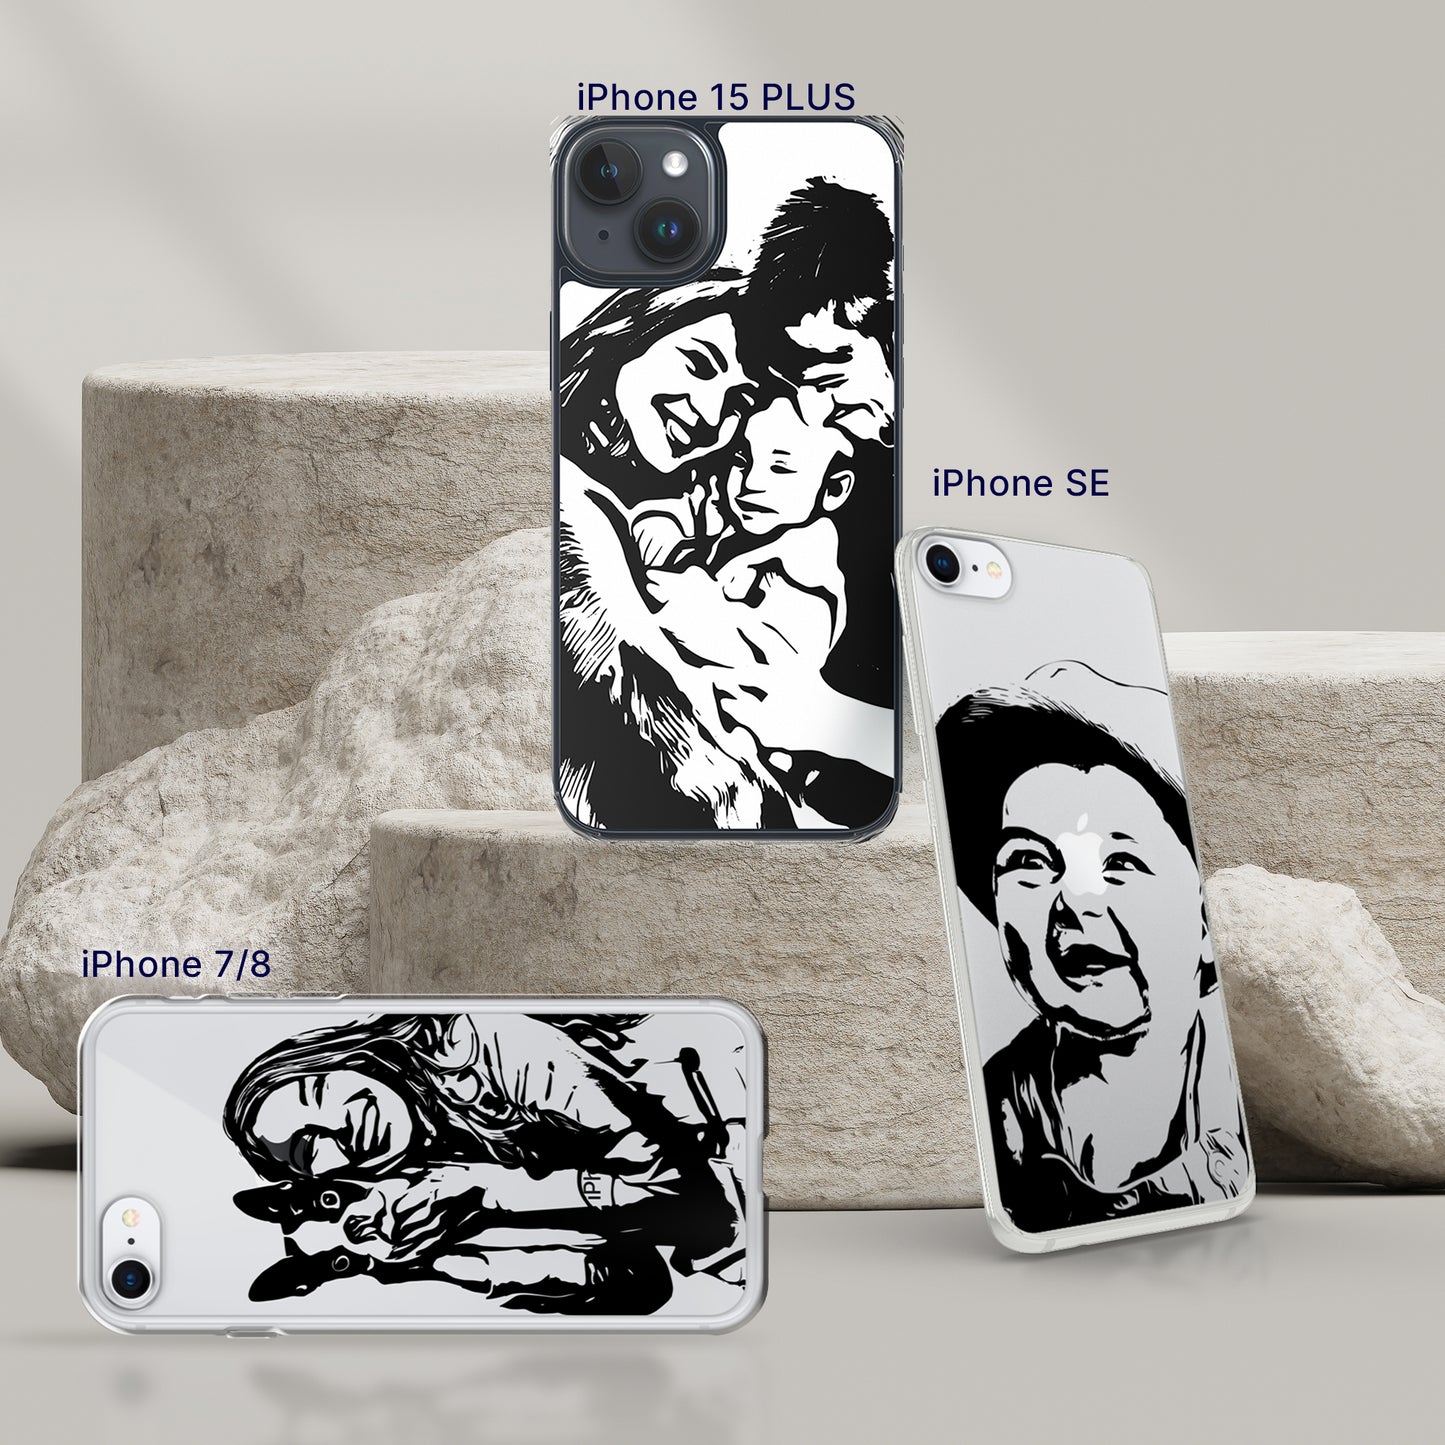 Personalized Line Drawing Case for iPhone | Seepu | 15 plus, se, 7/8